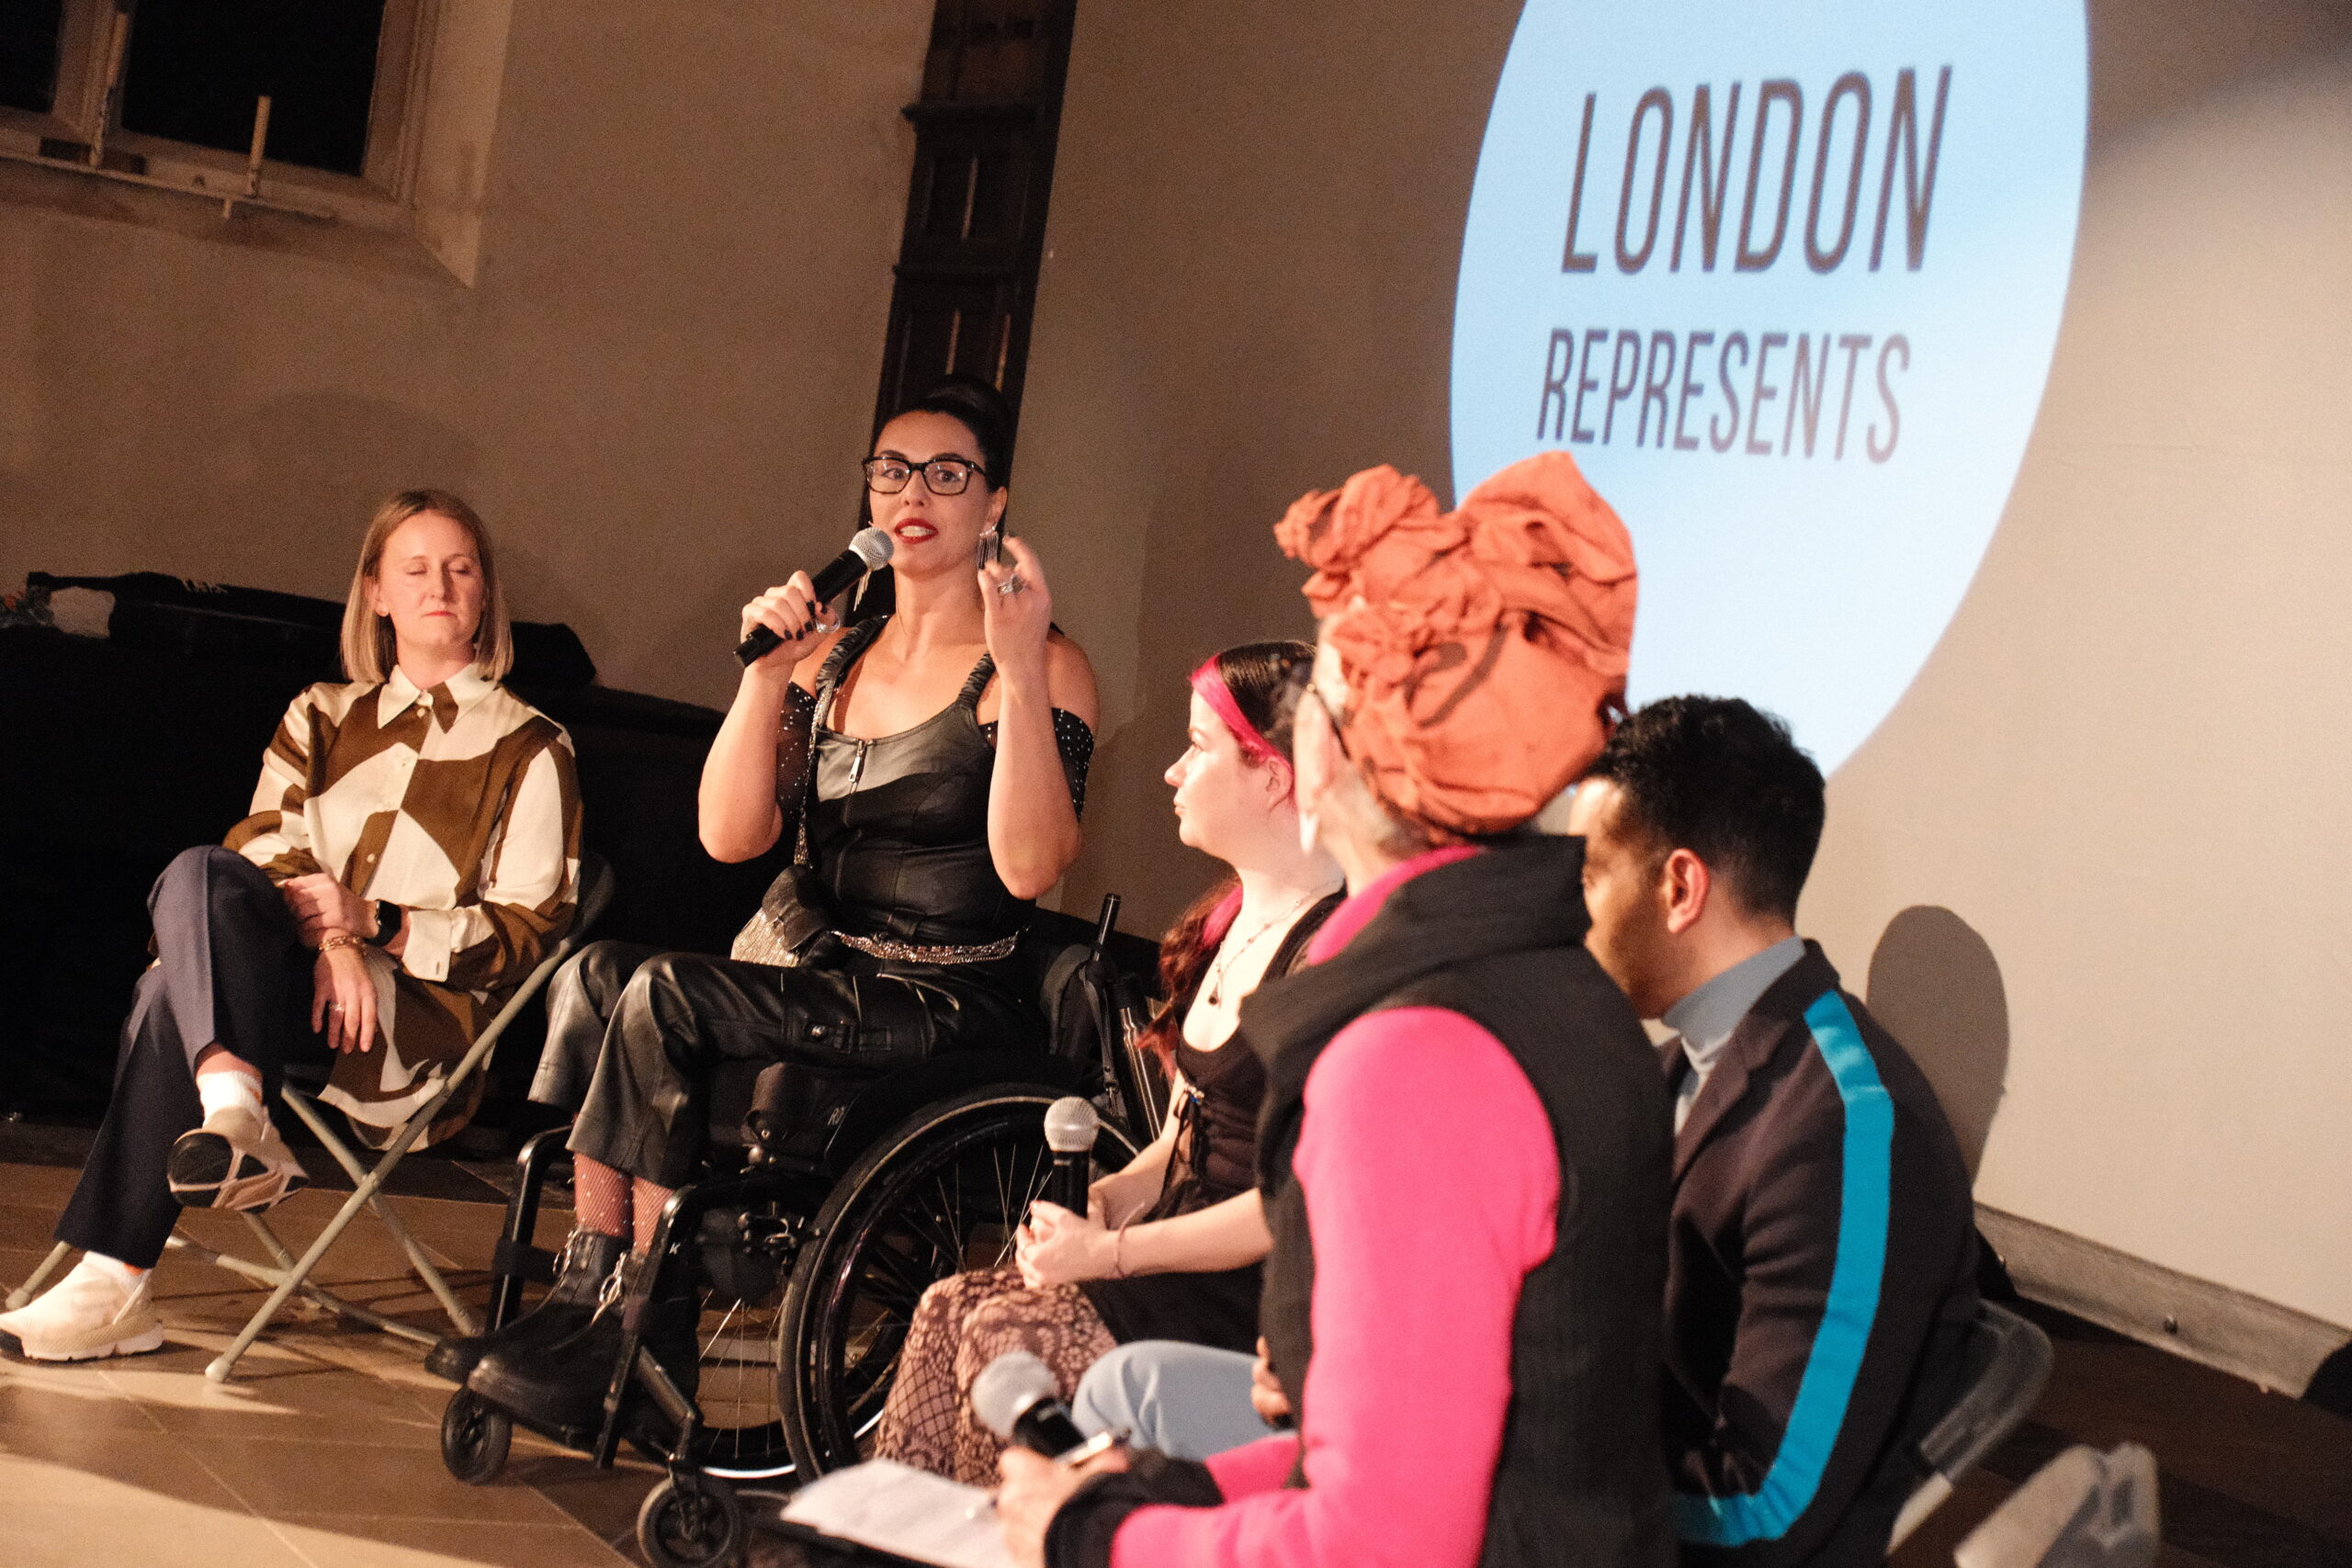 A panel discussion about disability in a church with 5 people involved. Written London Represents in a screen at the back.